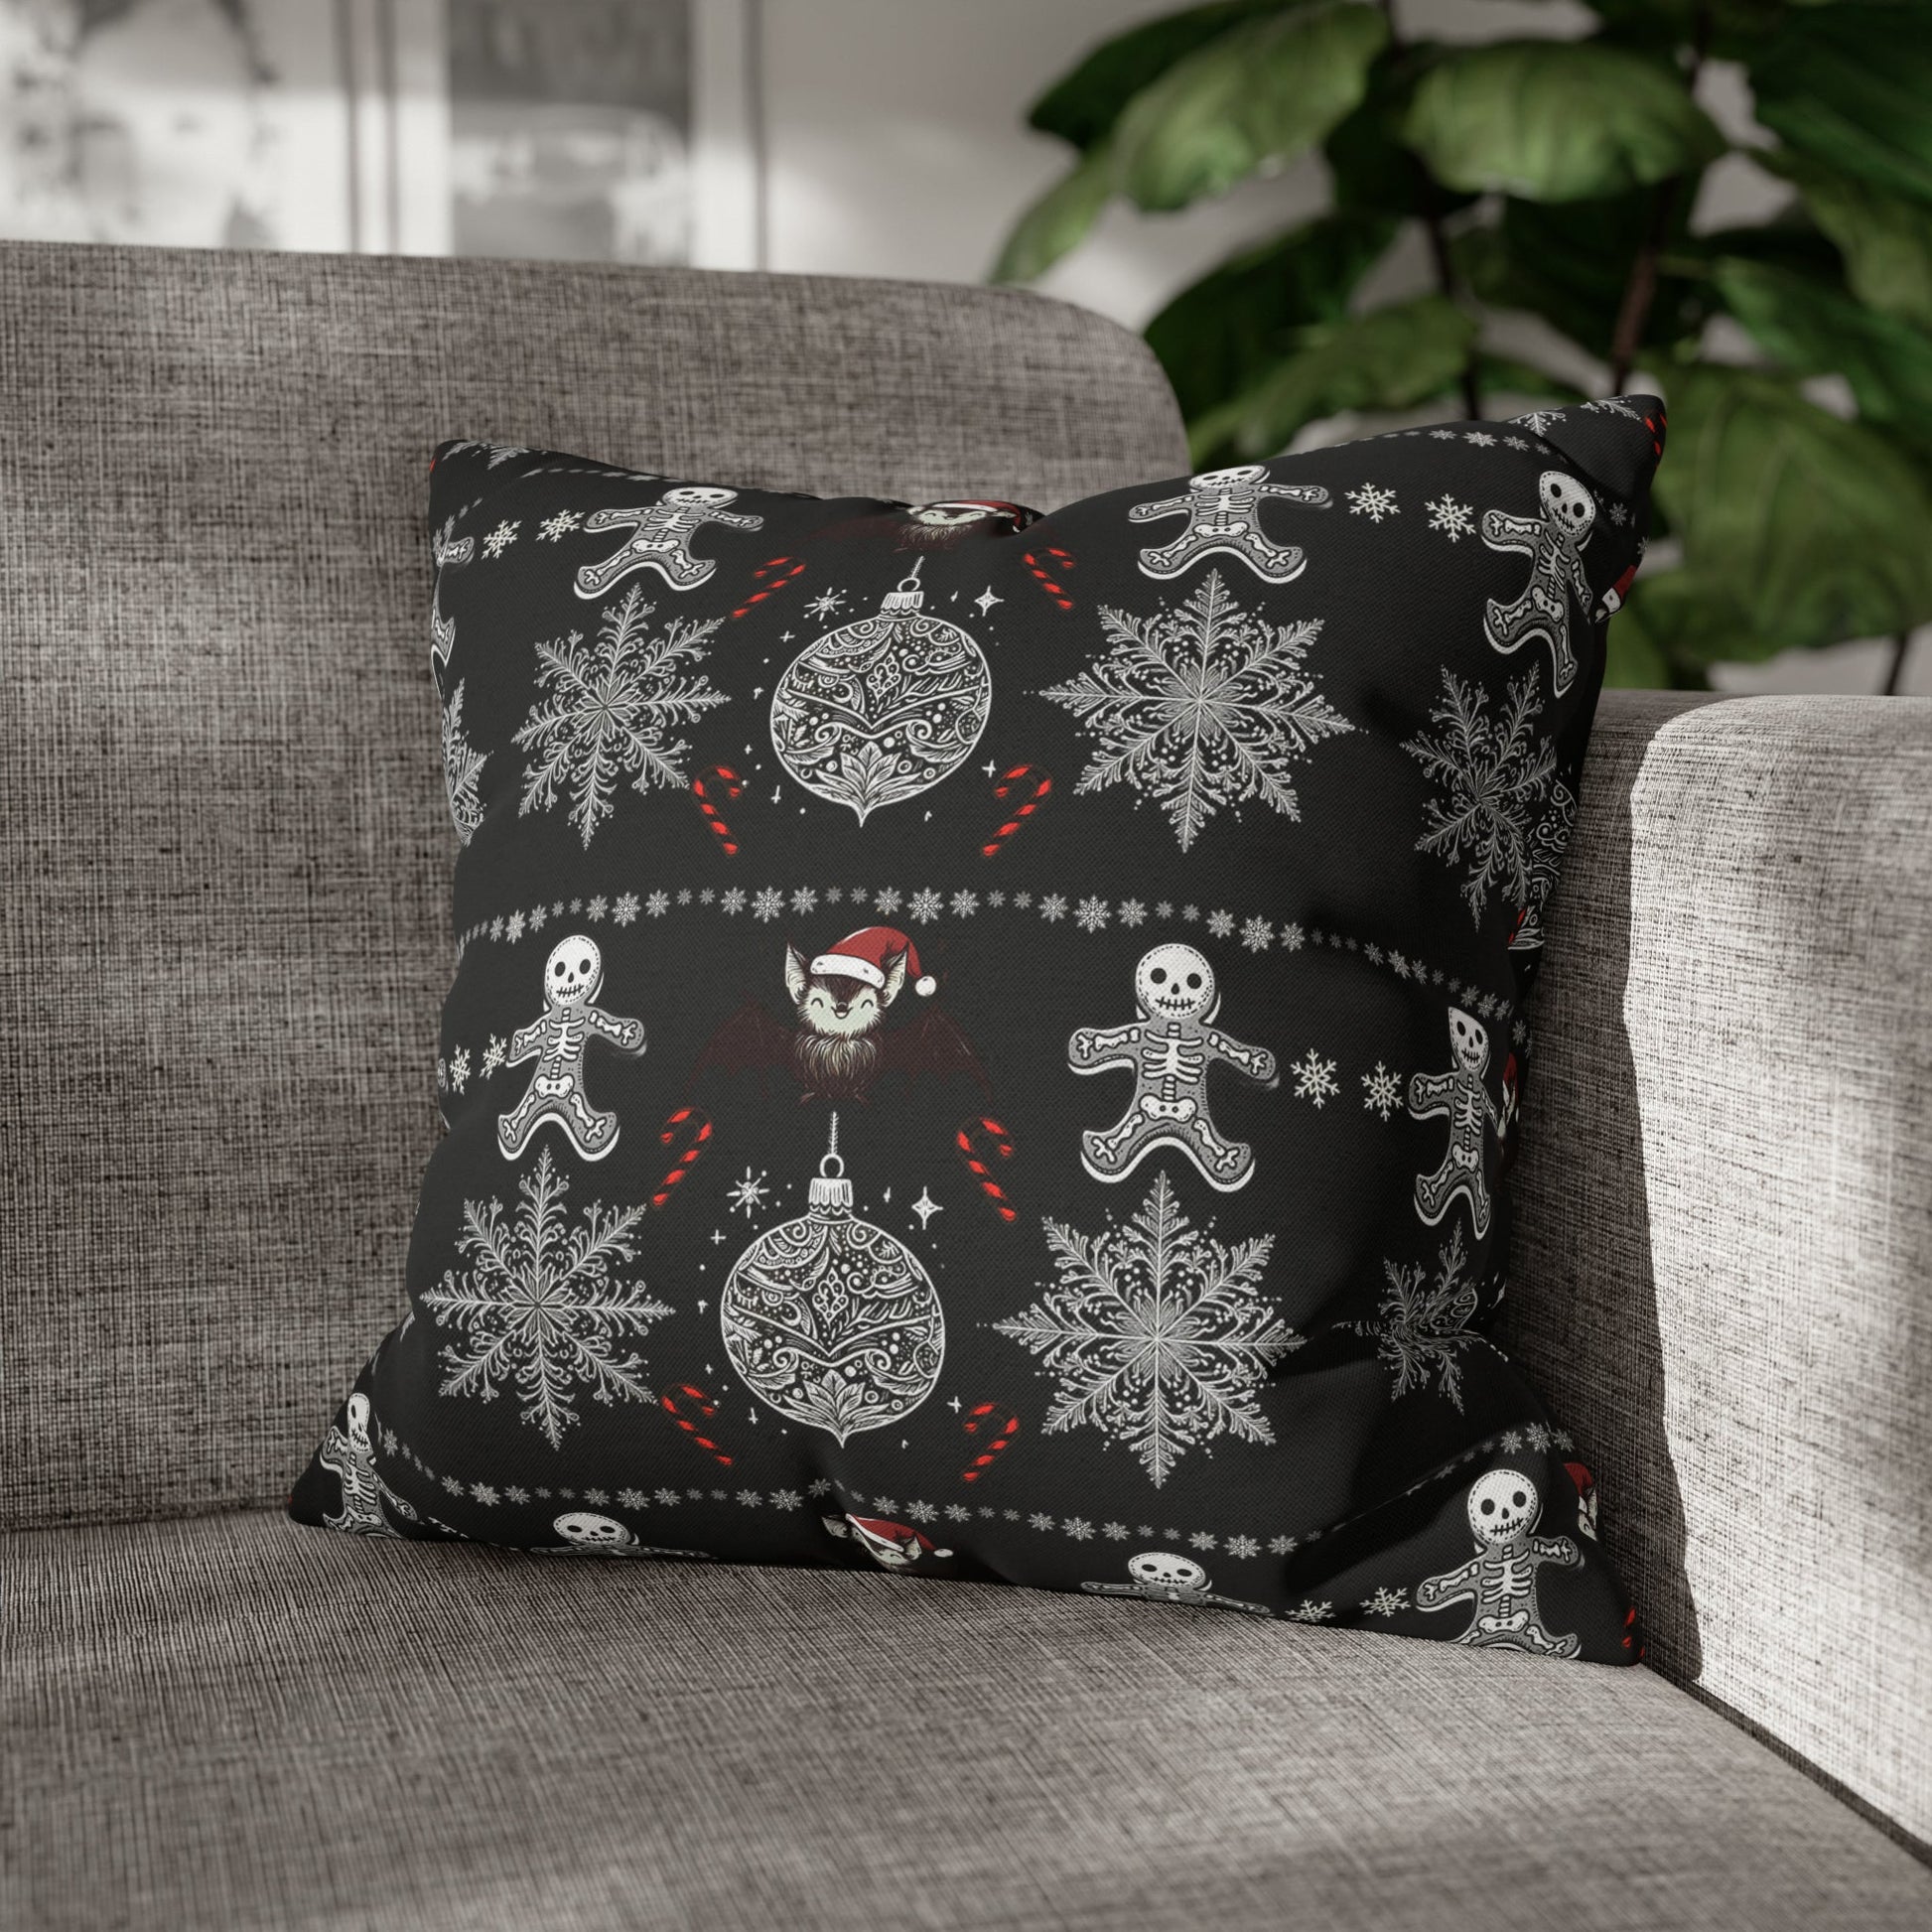 Spooky Christmas Square Pillow CaseHome DecorVTZdesigns18" × 18"All Over PrintAOPbats